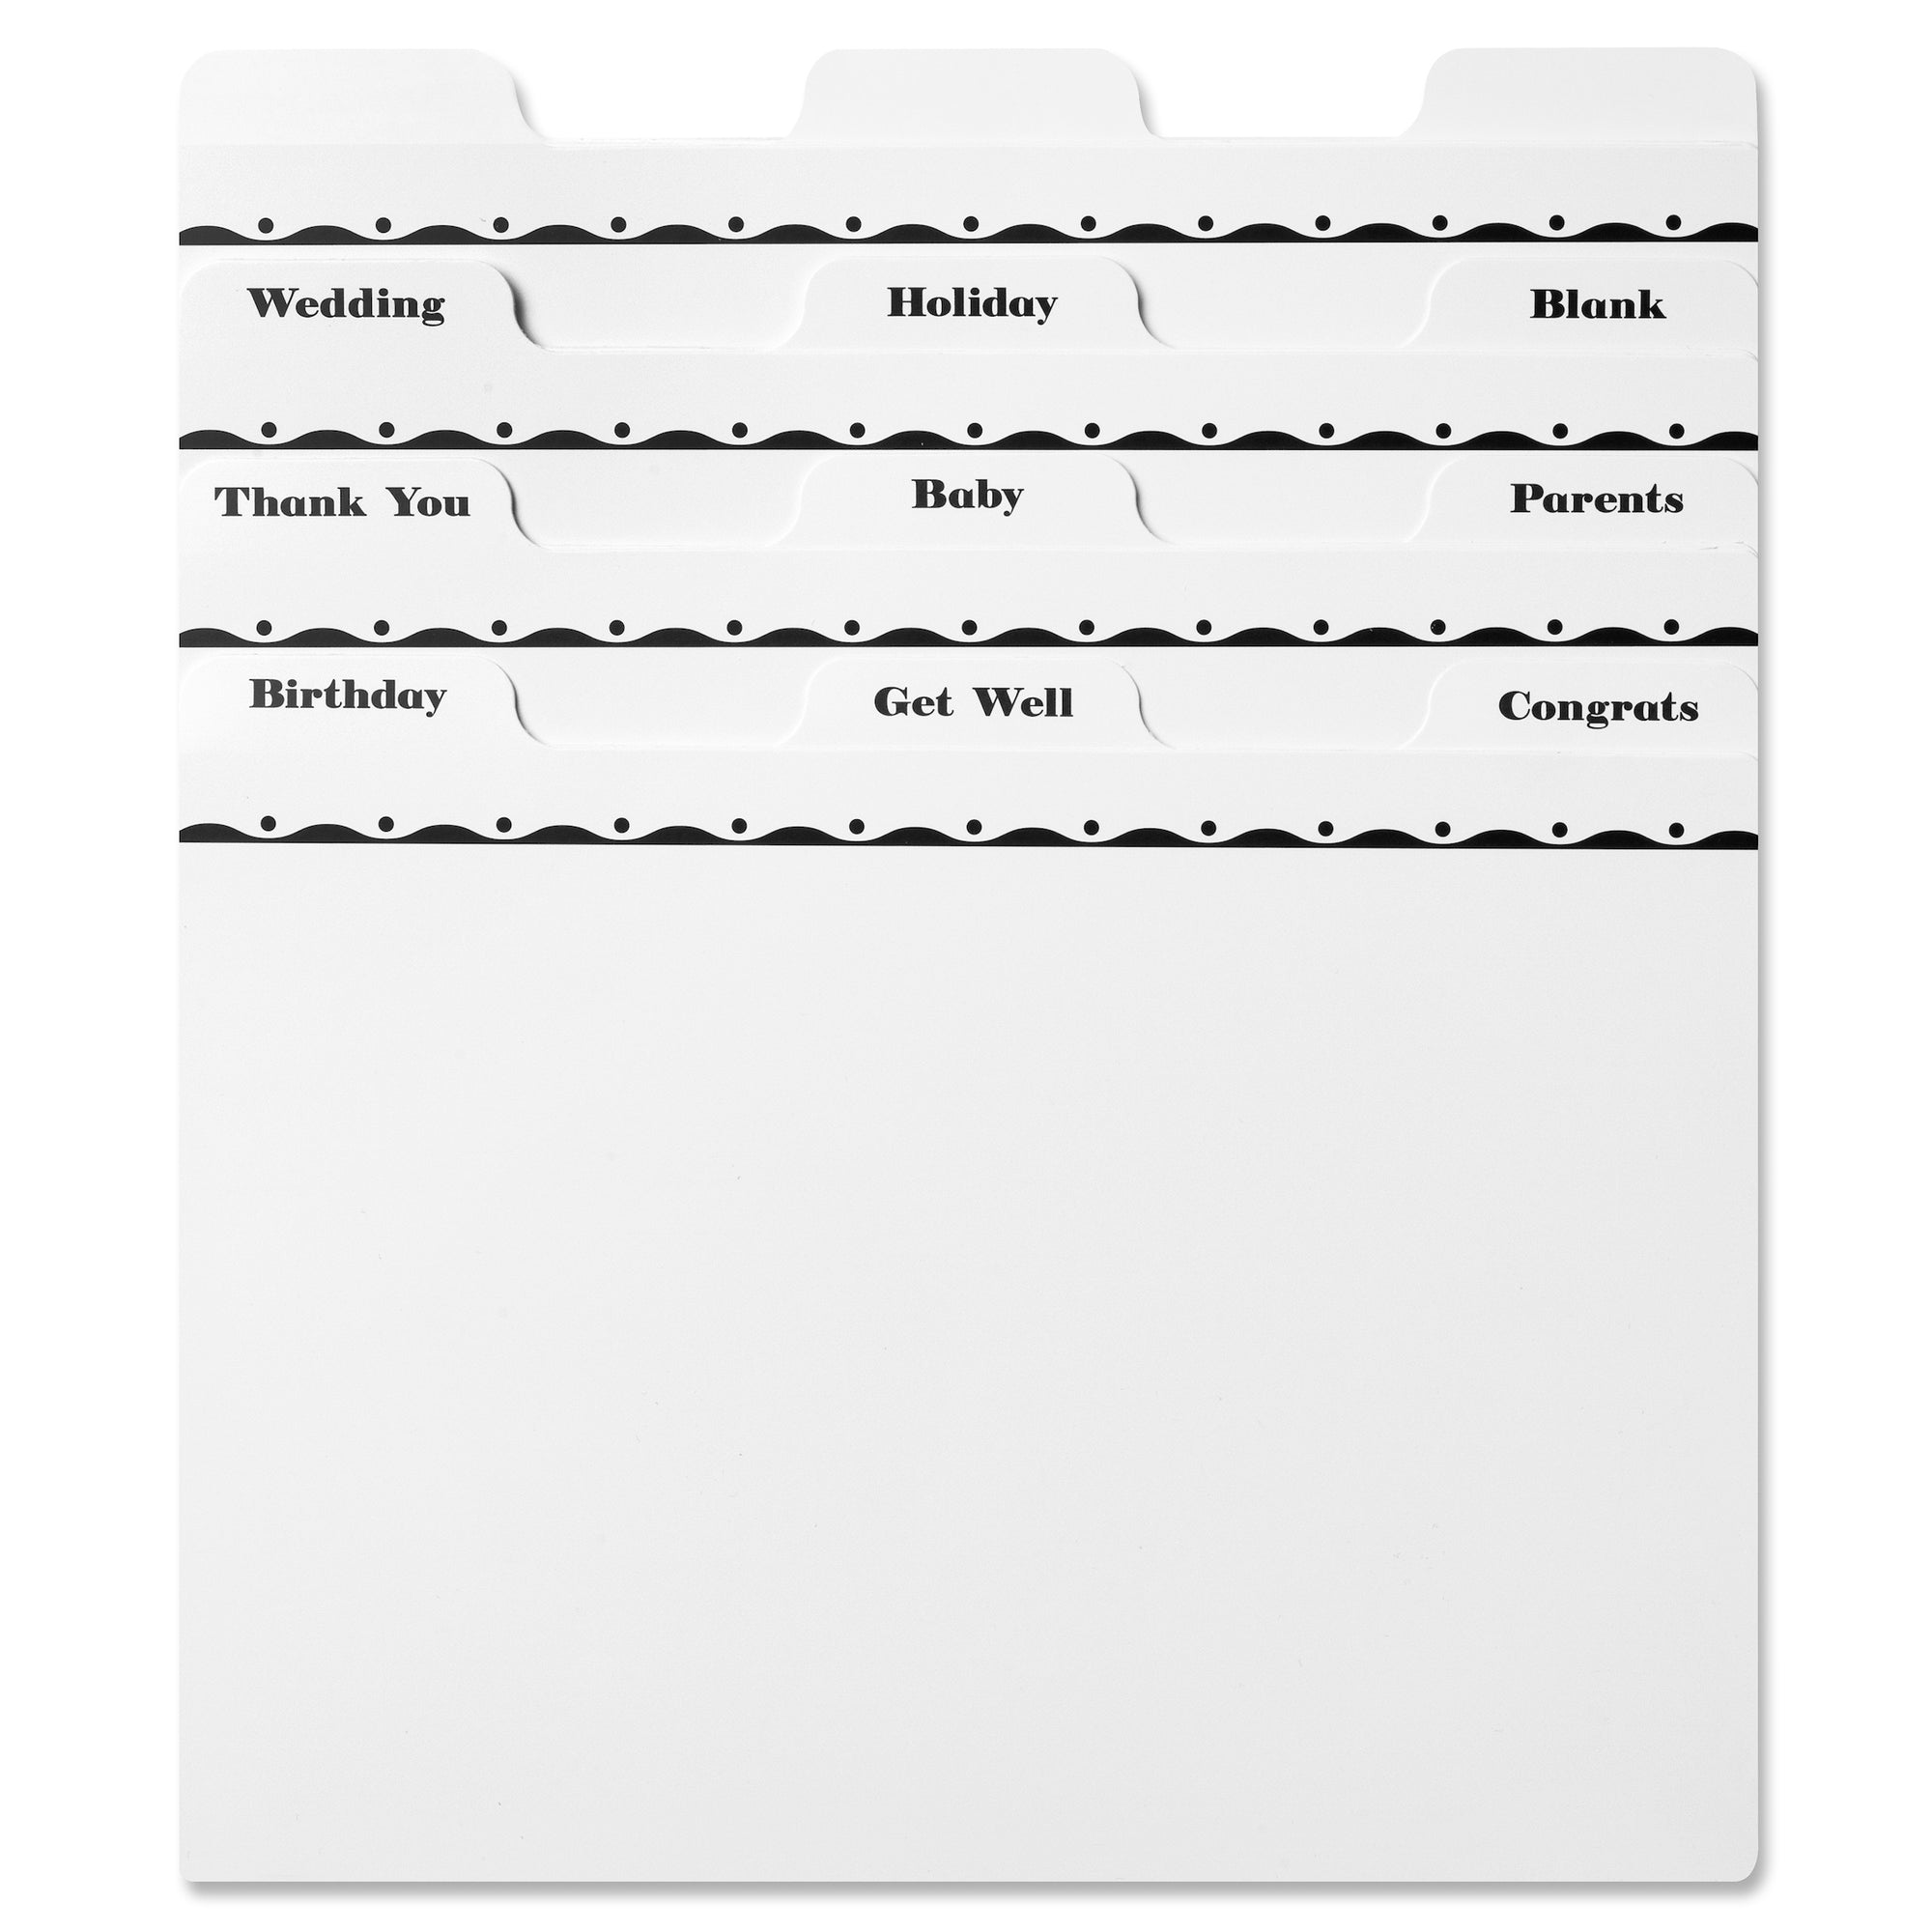 Jot & Mark Greeting Card Organizer Tin Box with Dividers, Cards, and  Envelopes (Magnolia)